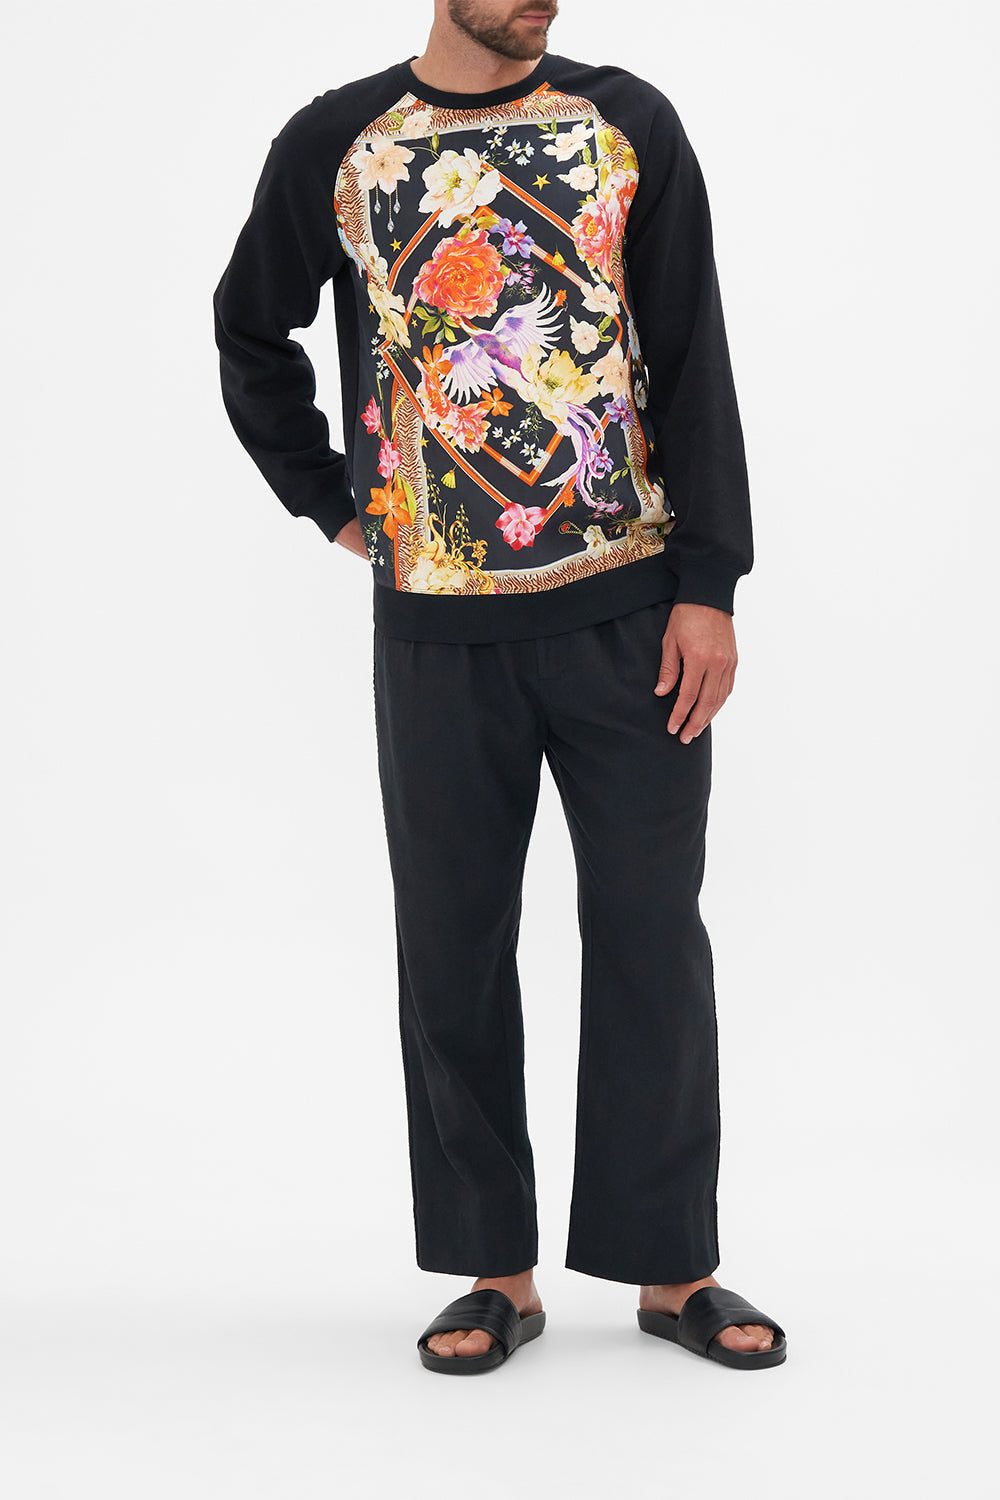 Front view of model wearing Hotel Franks by CAMILLA silk mens black knit jumper in Secret History floral print